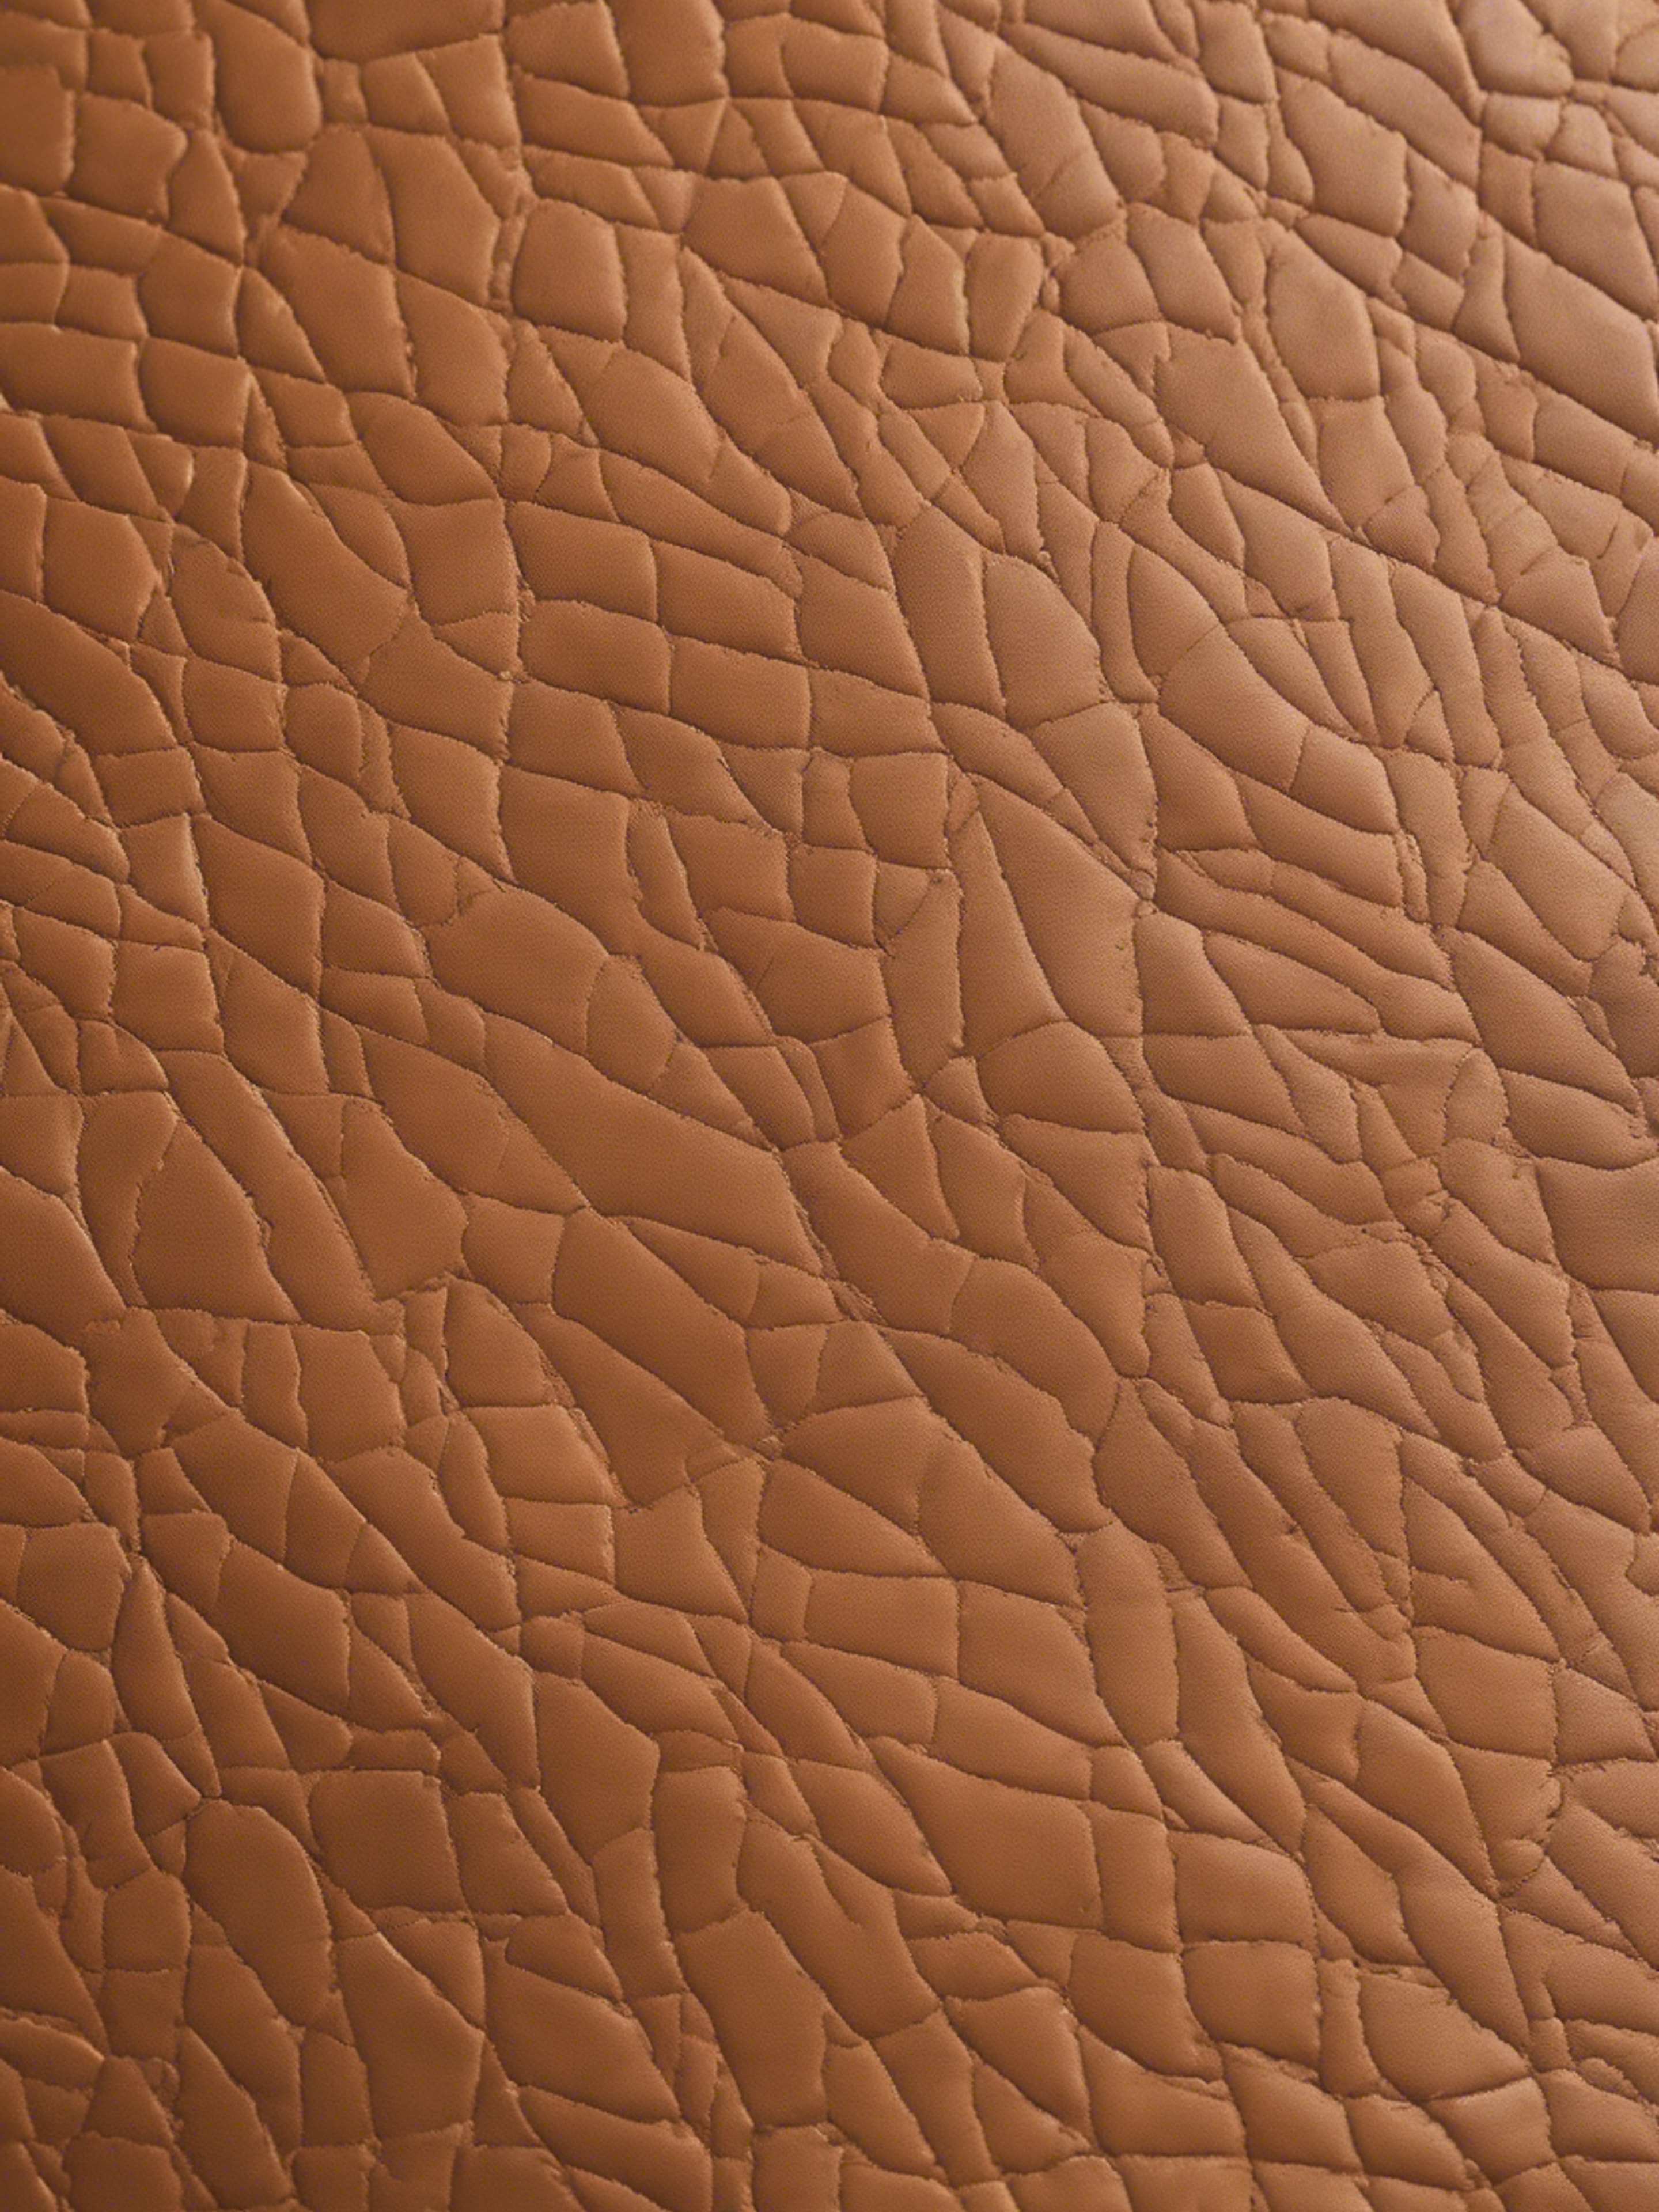 A close up detail of textured tan leather with visible creases and imperfections. Wallpaper[dcf720cc5804433d887d]